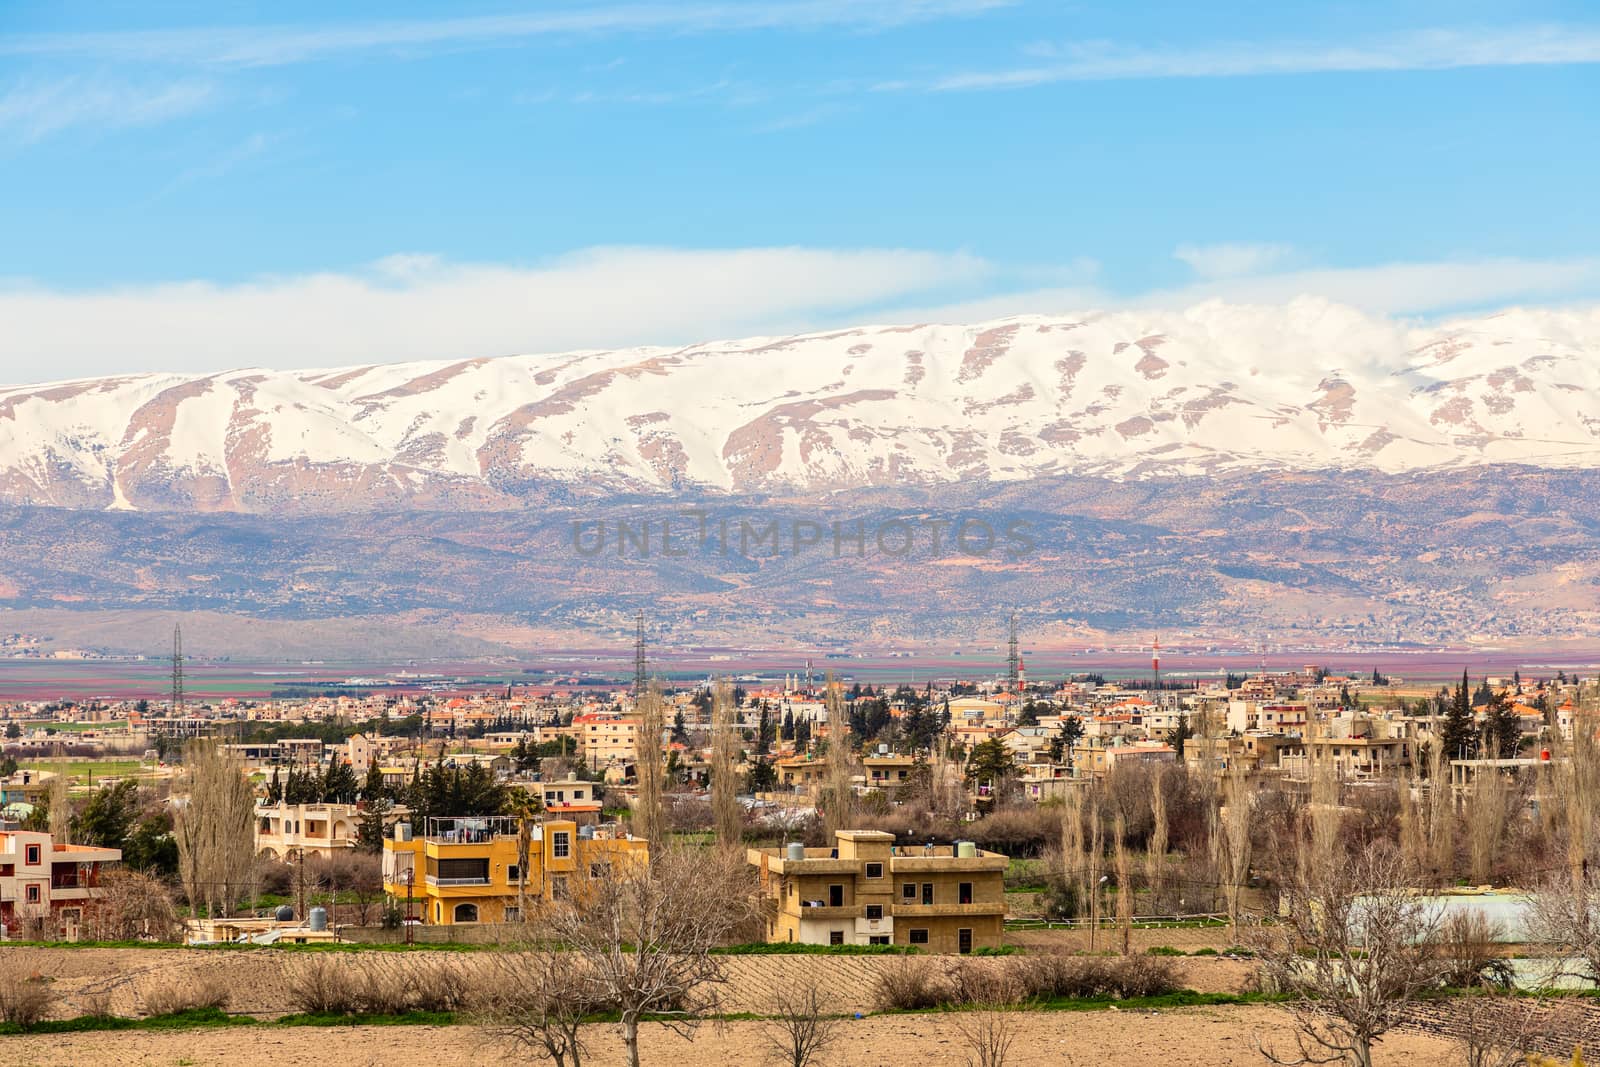 Lebanese houses in Beqaa Valley with snow cap mountains in the b by ambeon